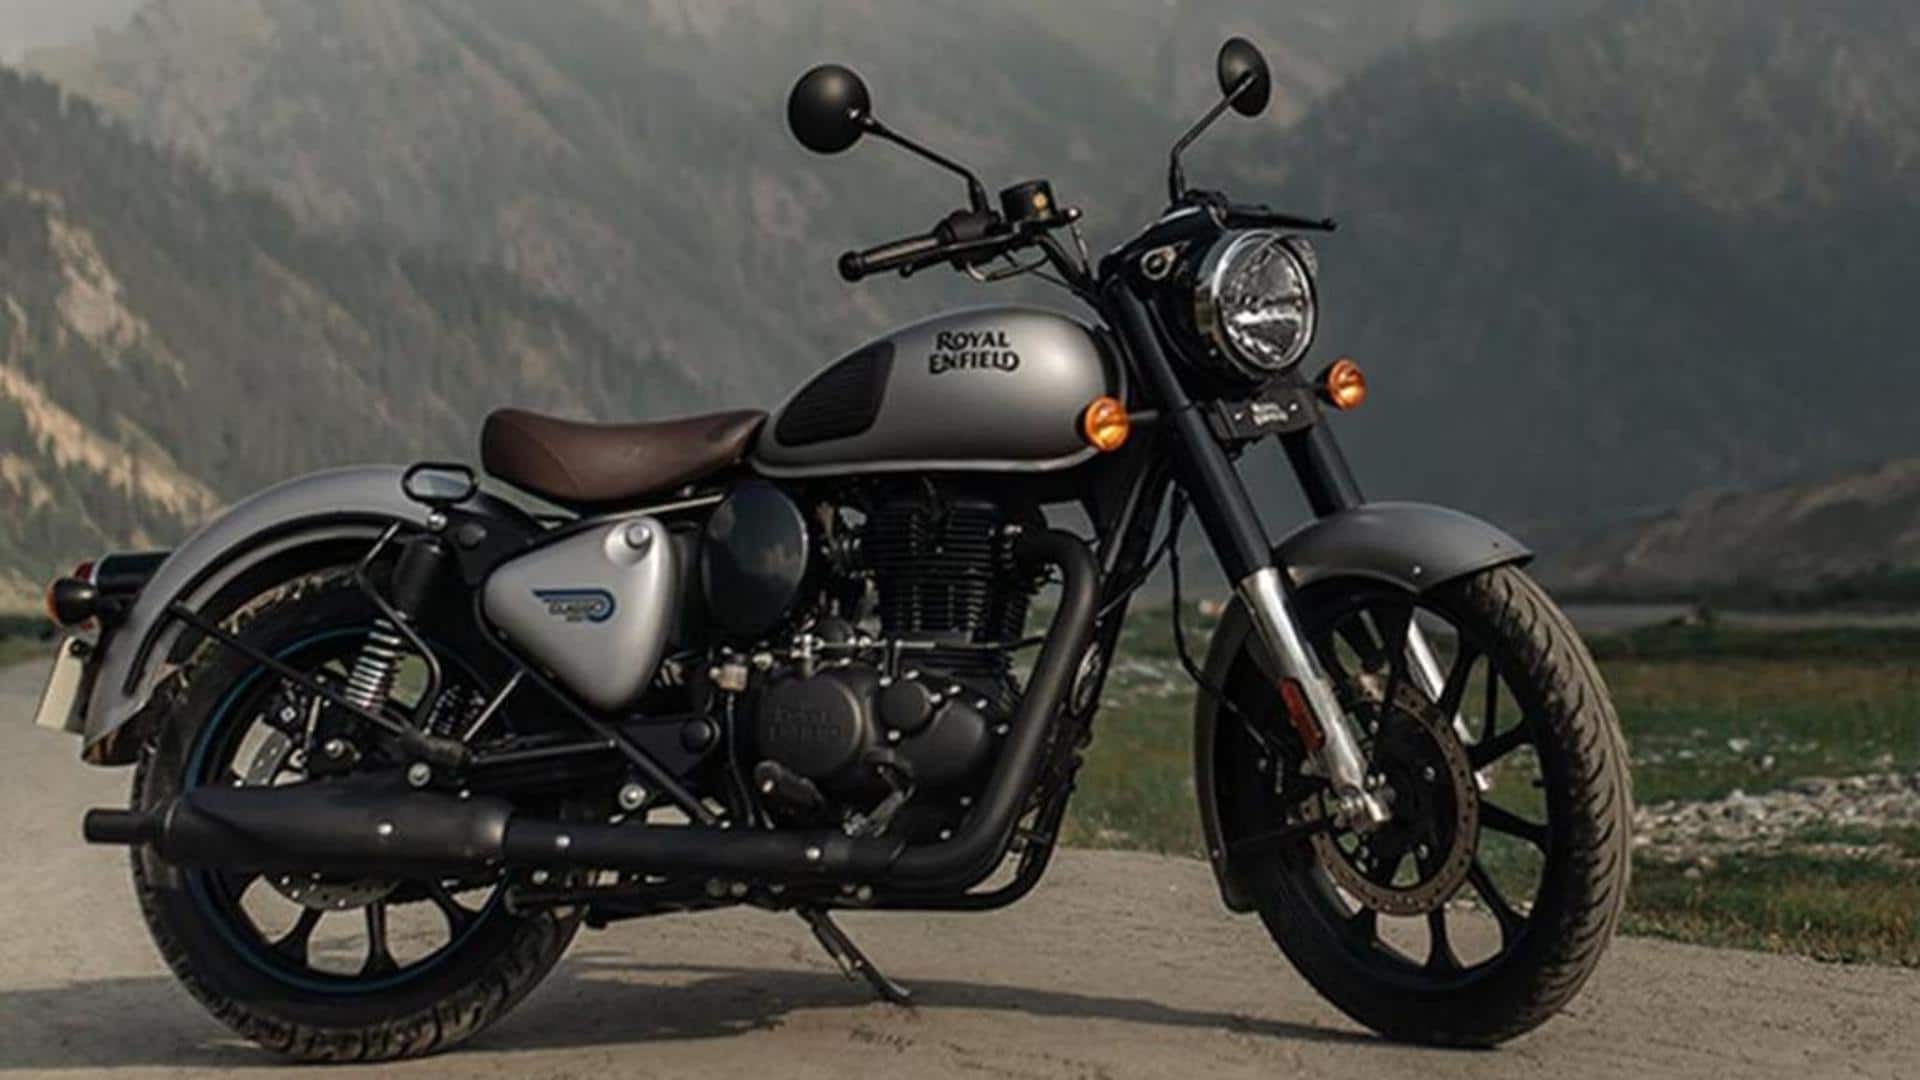 Royal Enfield Classic 650 could be game-changing motorcycle: Here's why